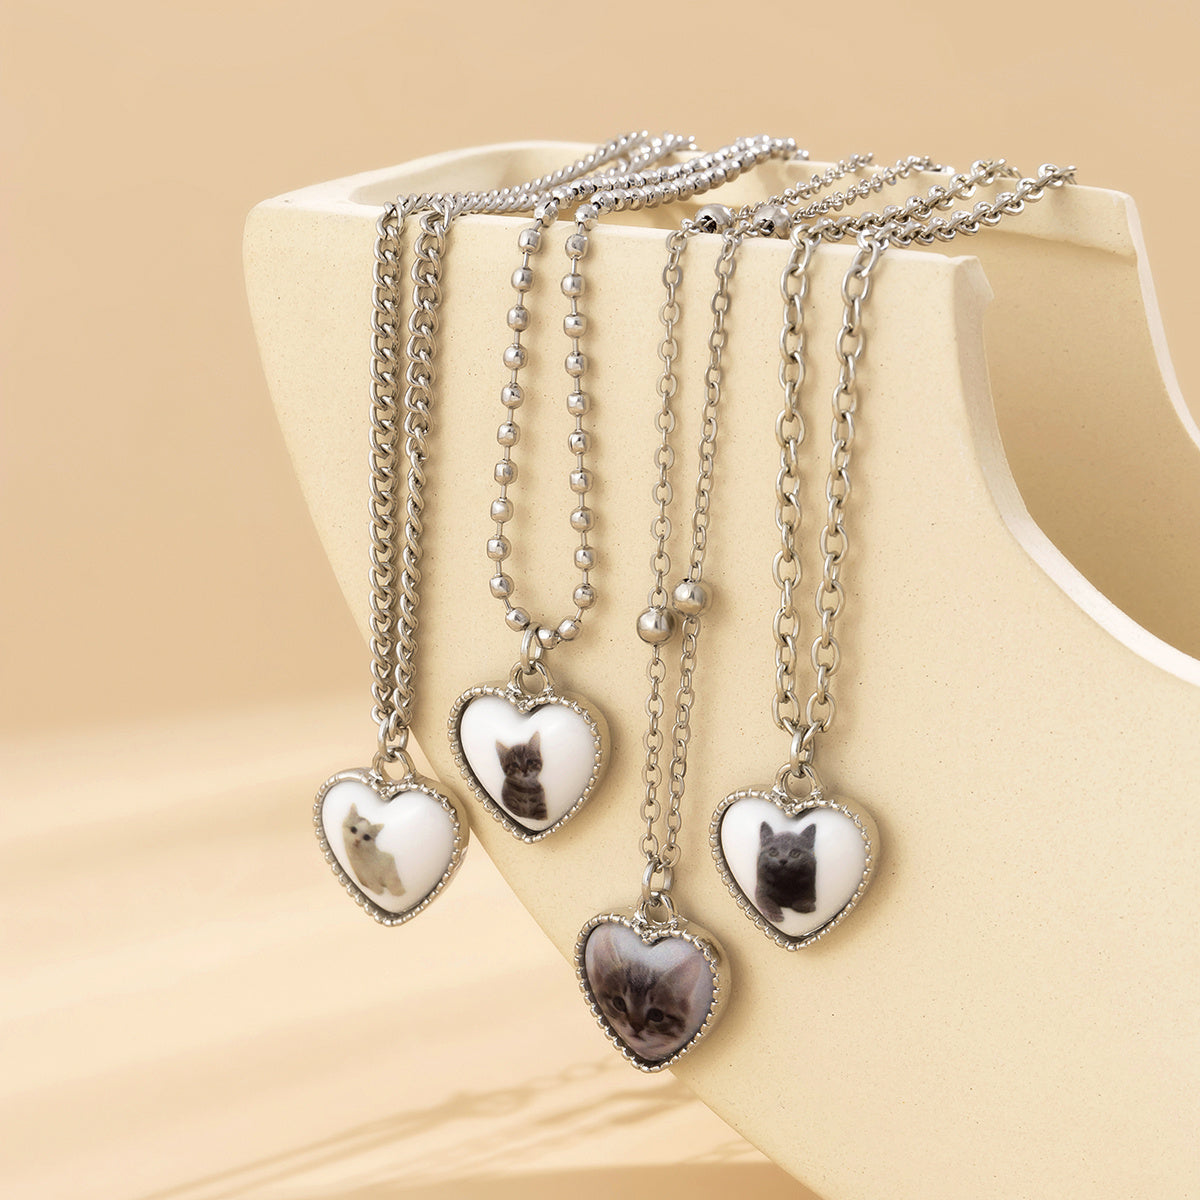 Adorable Cat Pattern Heart Pendant Necklace Set - Perfect for Cat Lovers!